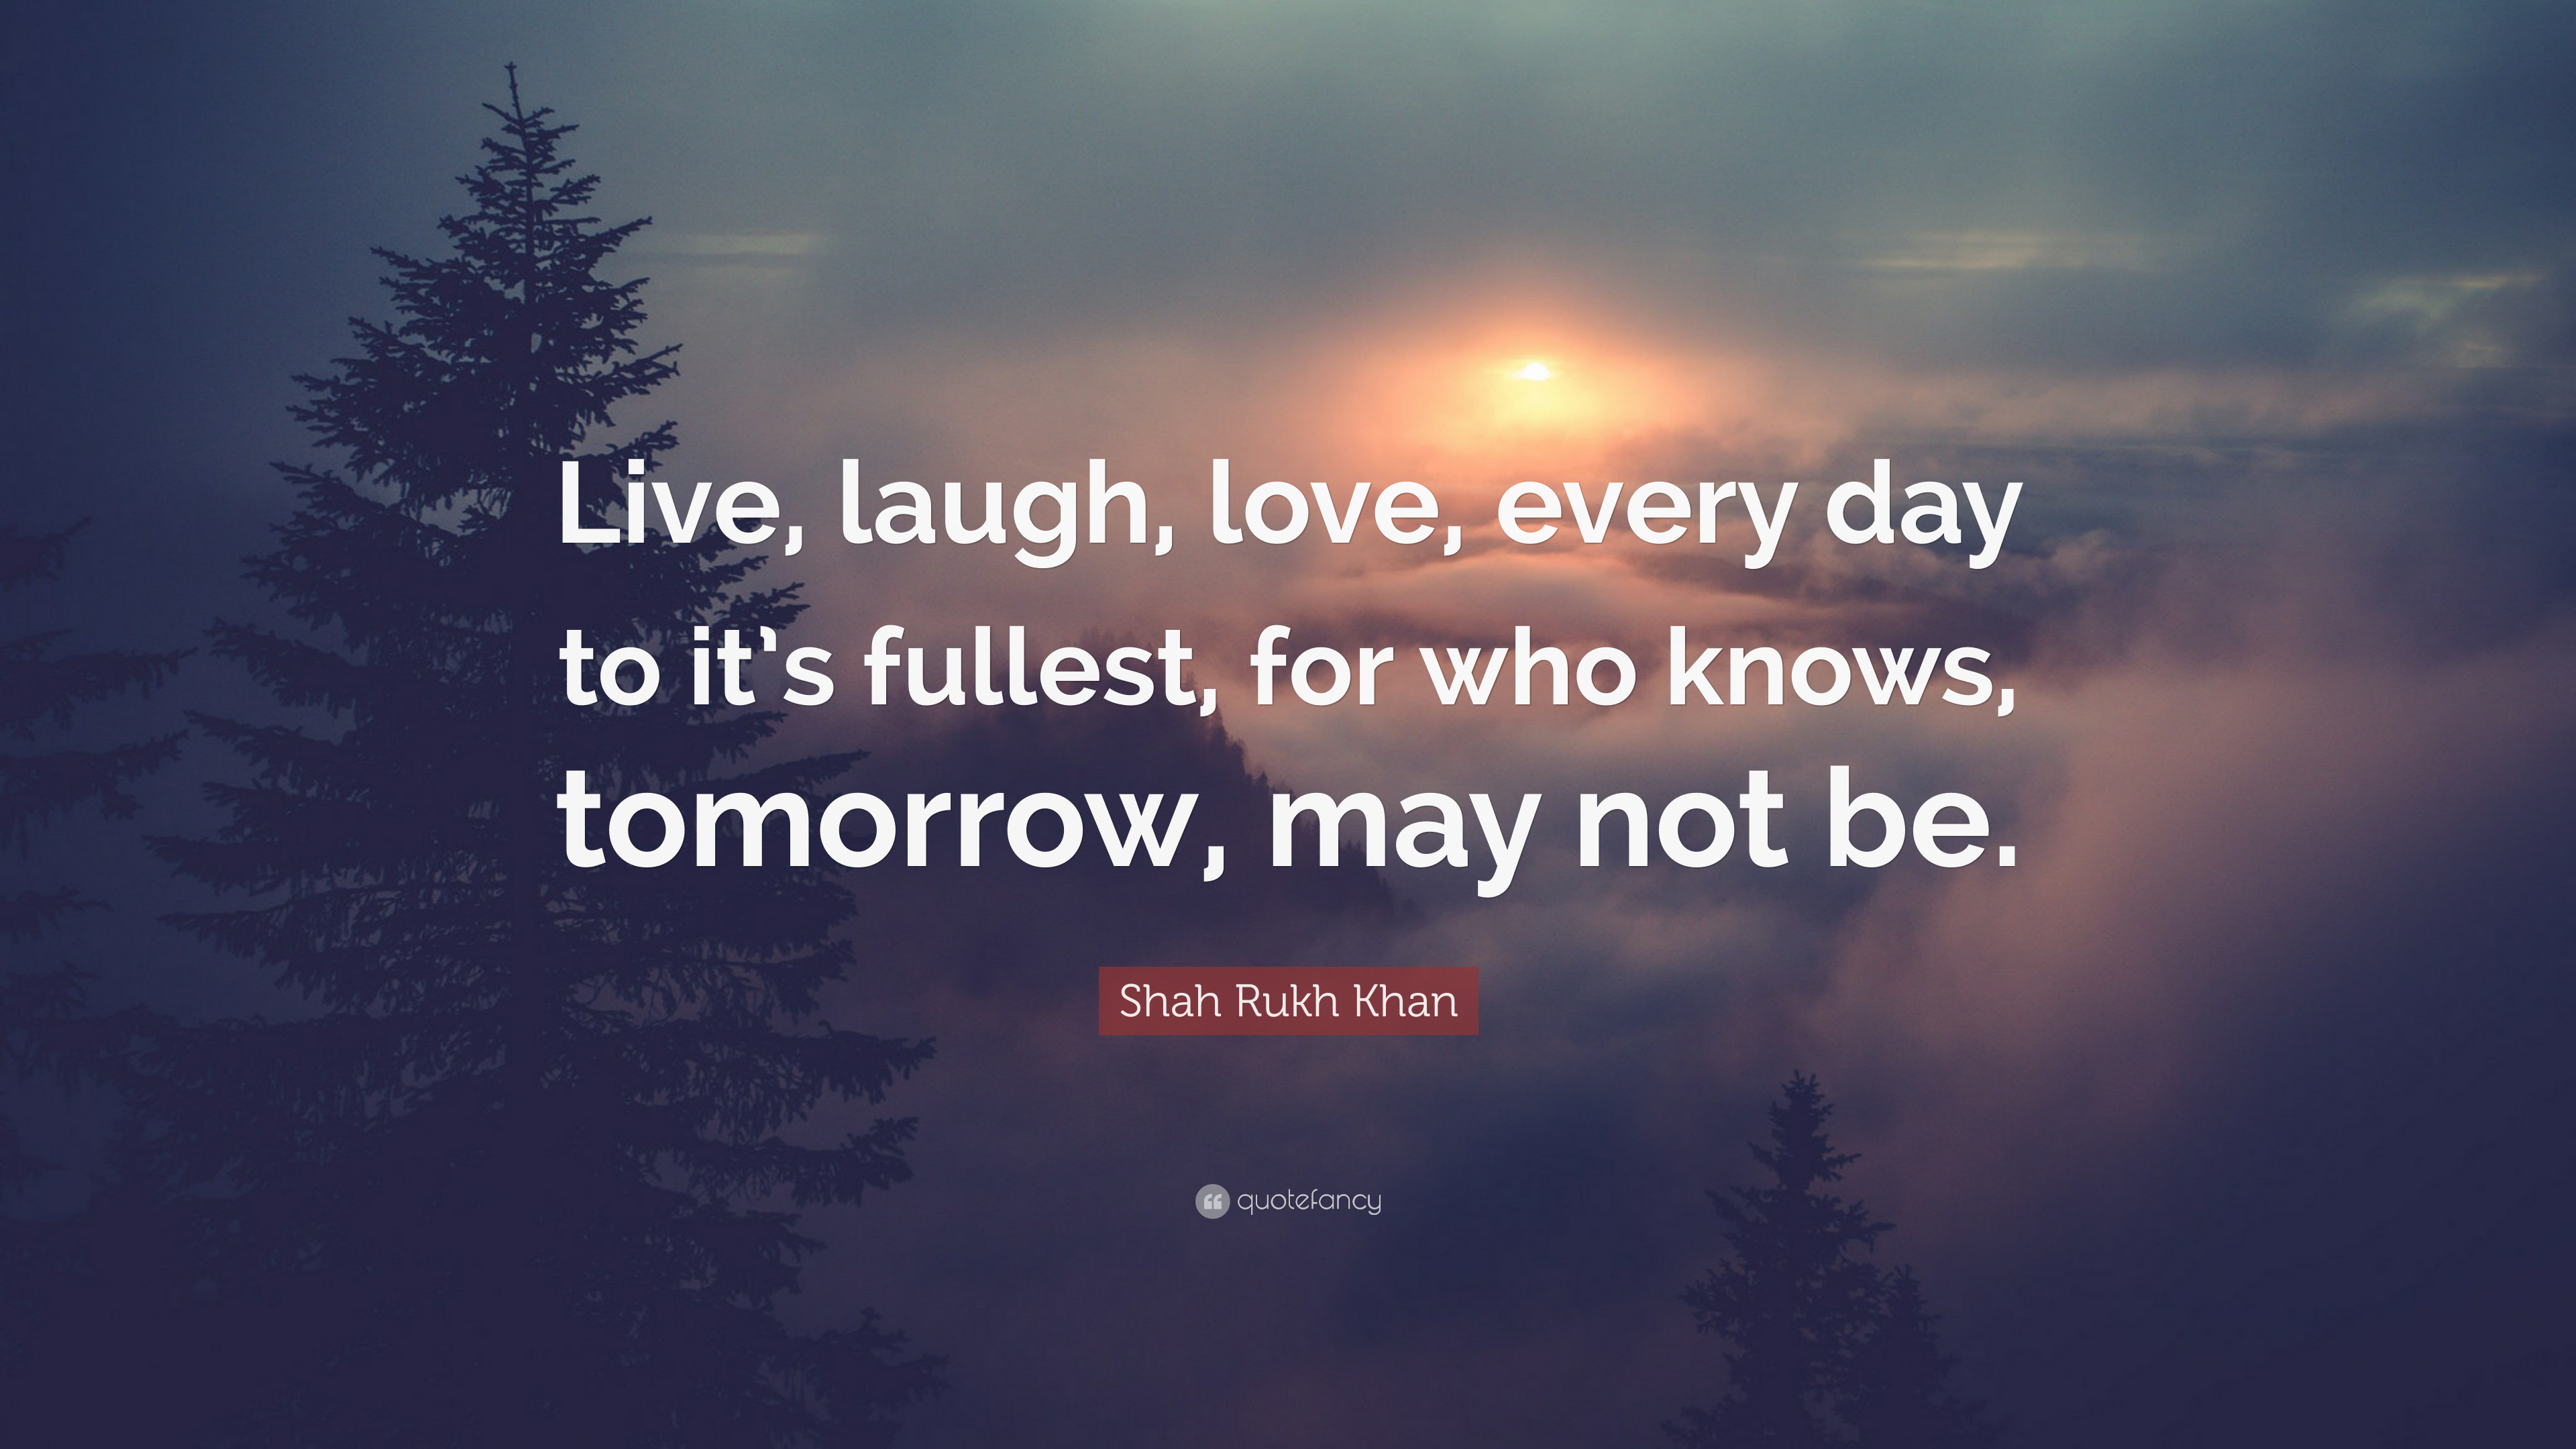 3840x2160 Shah Rukh Khan Quote: “Live, laugh, love, every day to it's